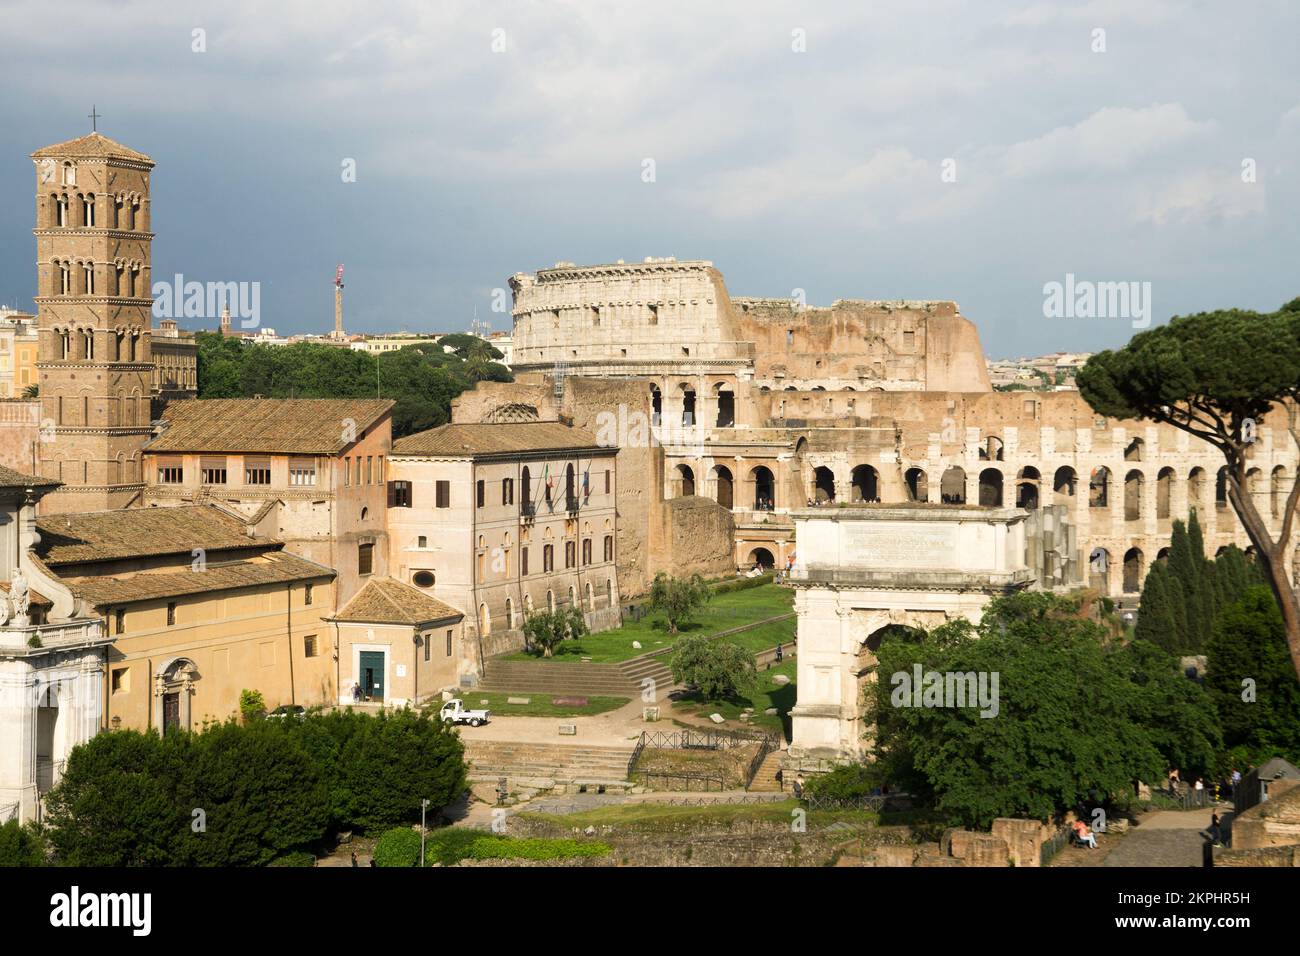 Ancient Ruins in Rome, Italy Stock Photo